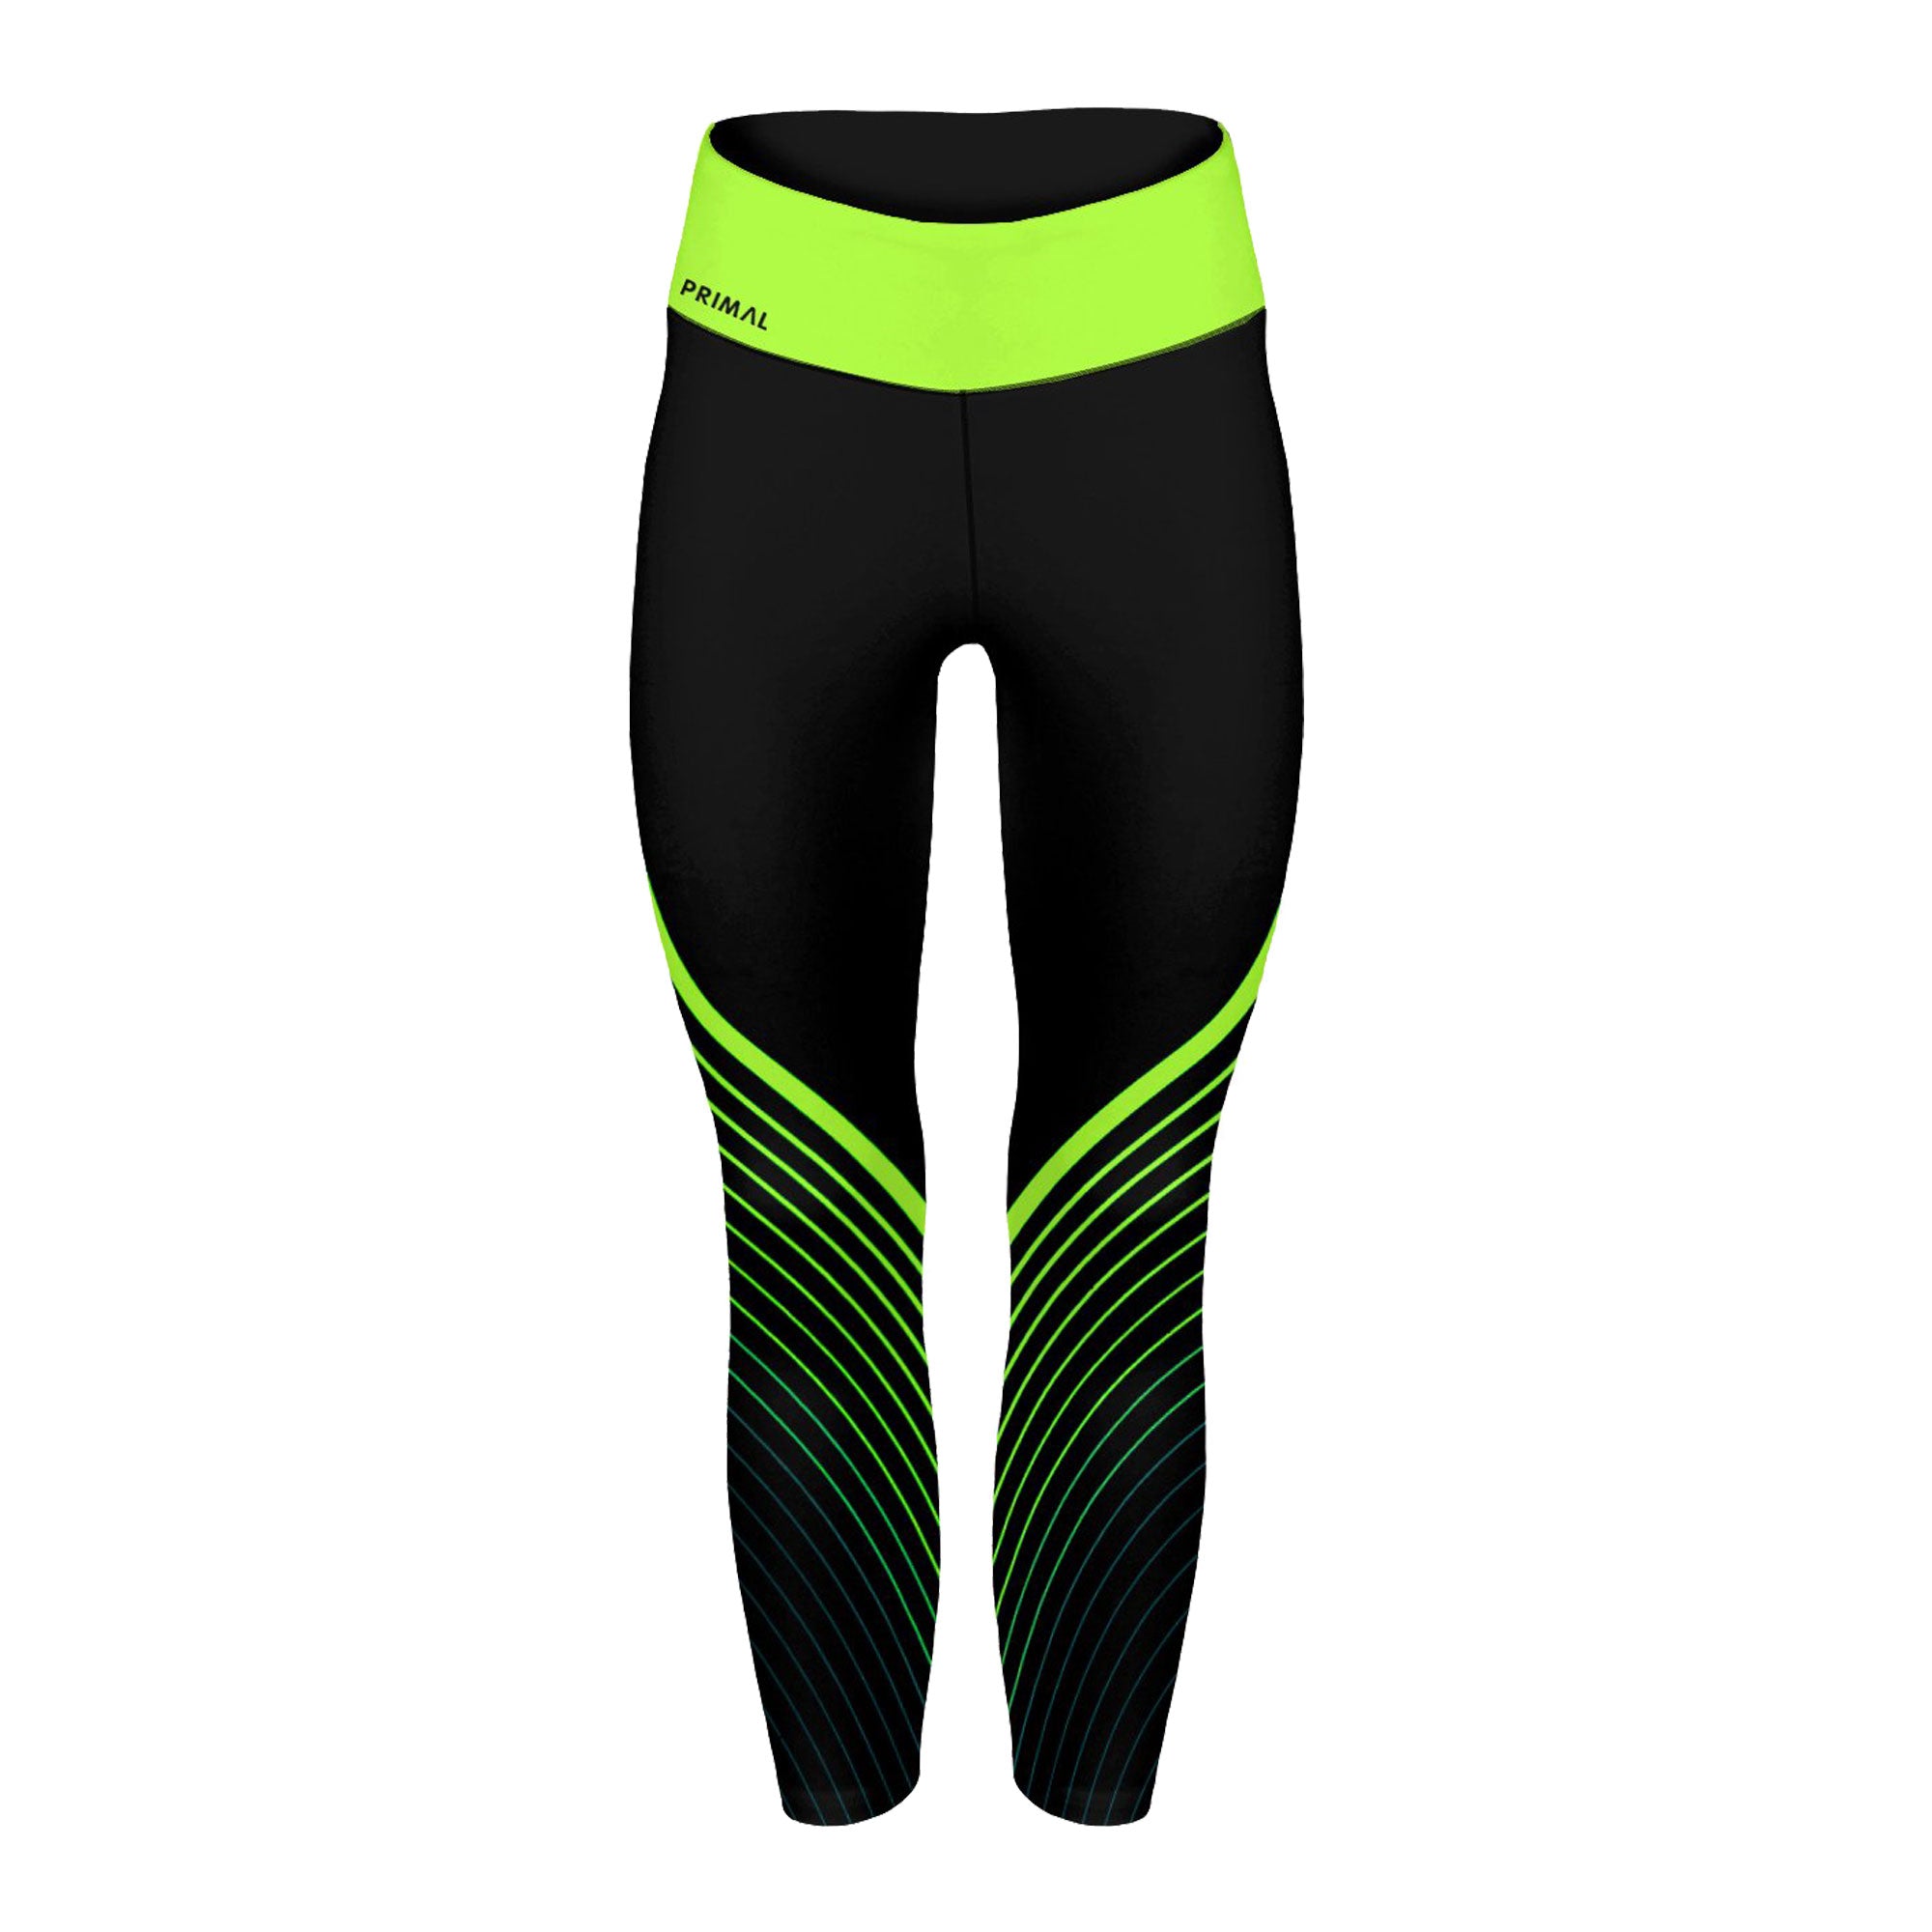 Black High Waisted Leggings With Neon Green Lined Sheer Panel